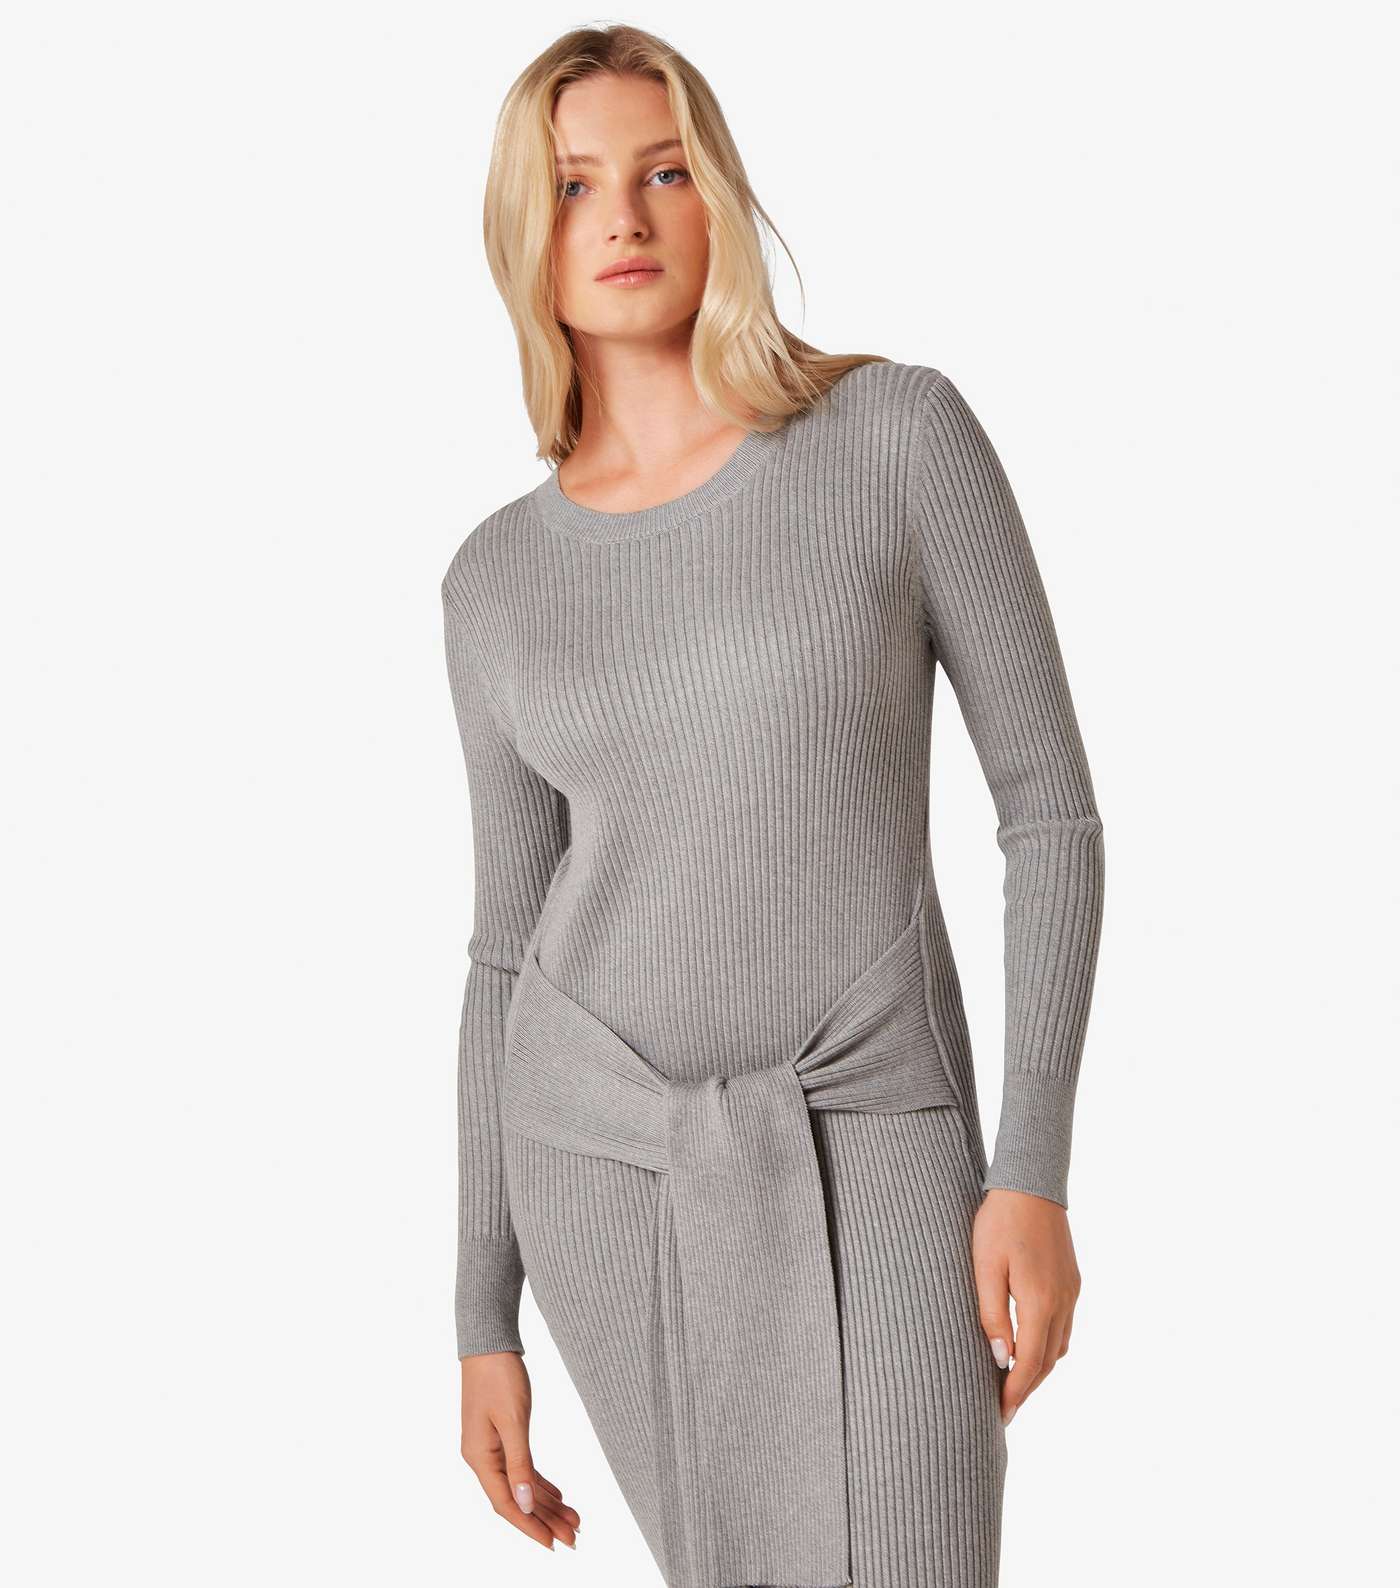 Apricot Ribbed Knit Tie Jumper Dress Image 2